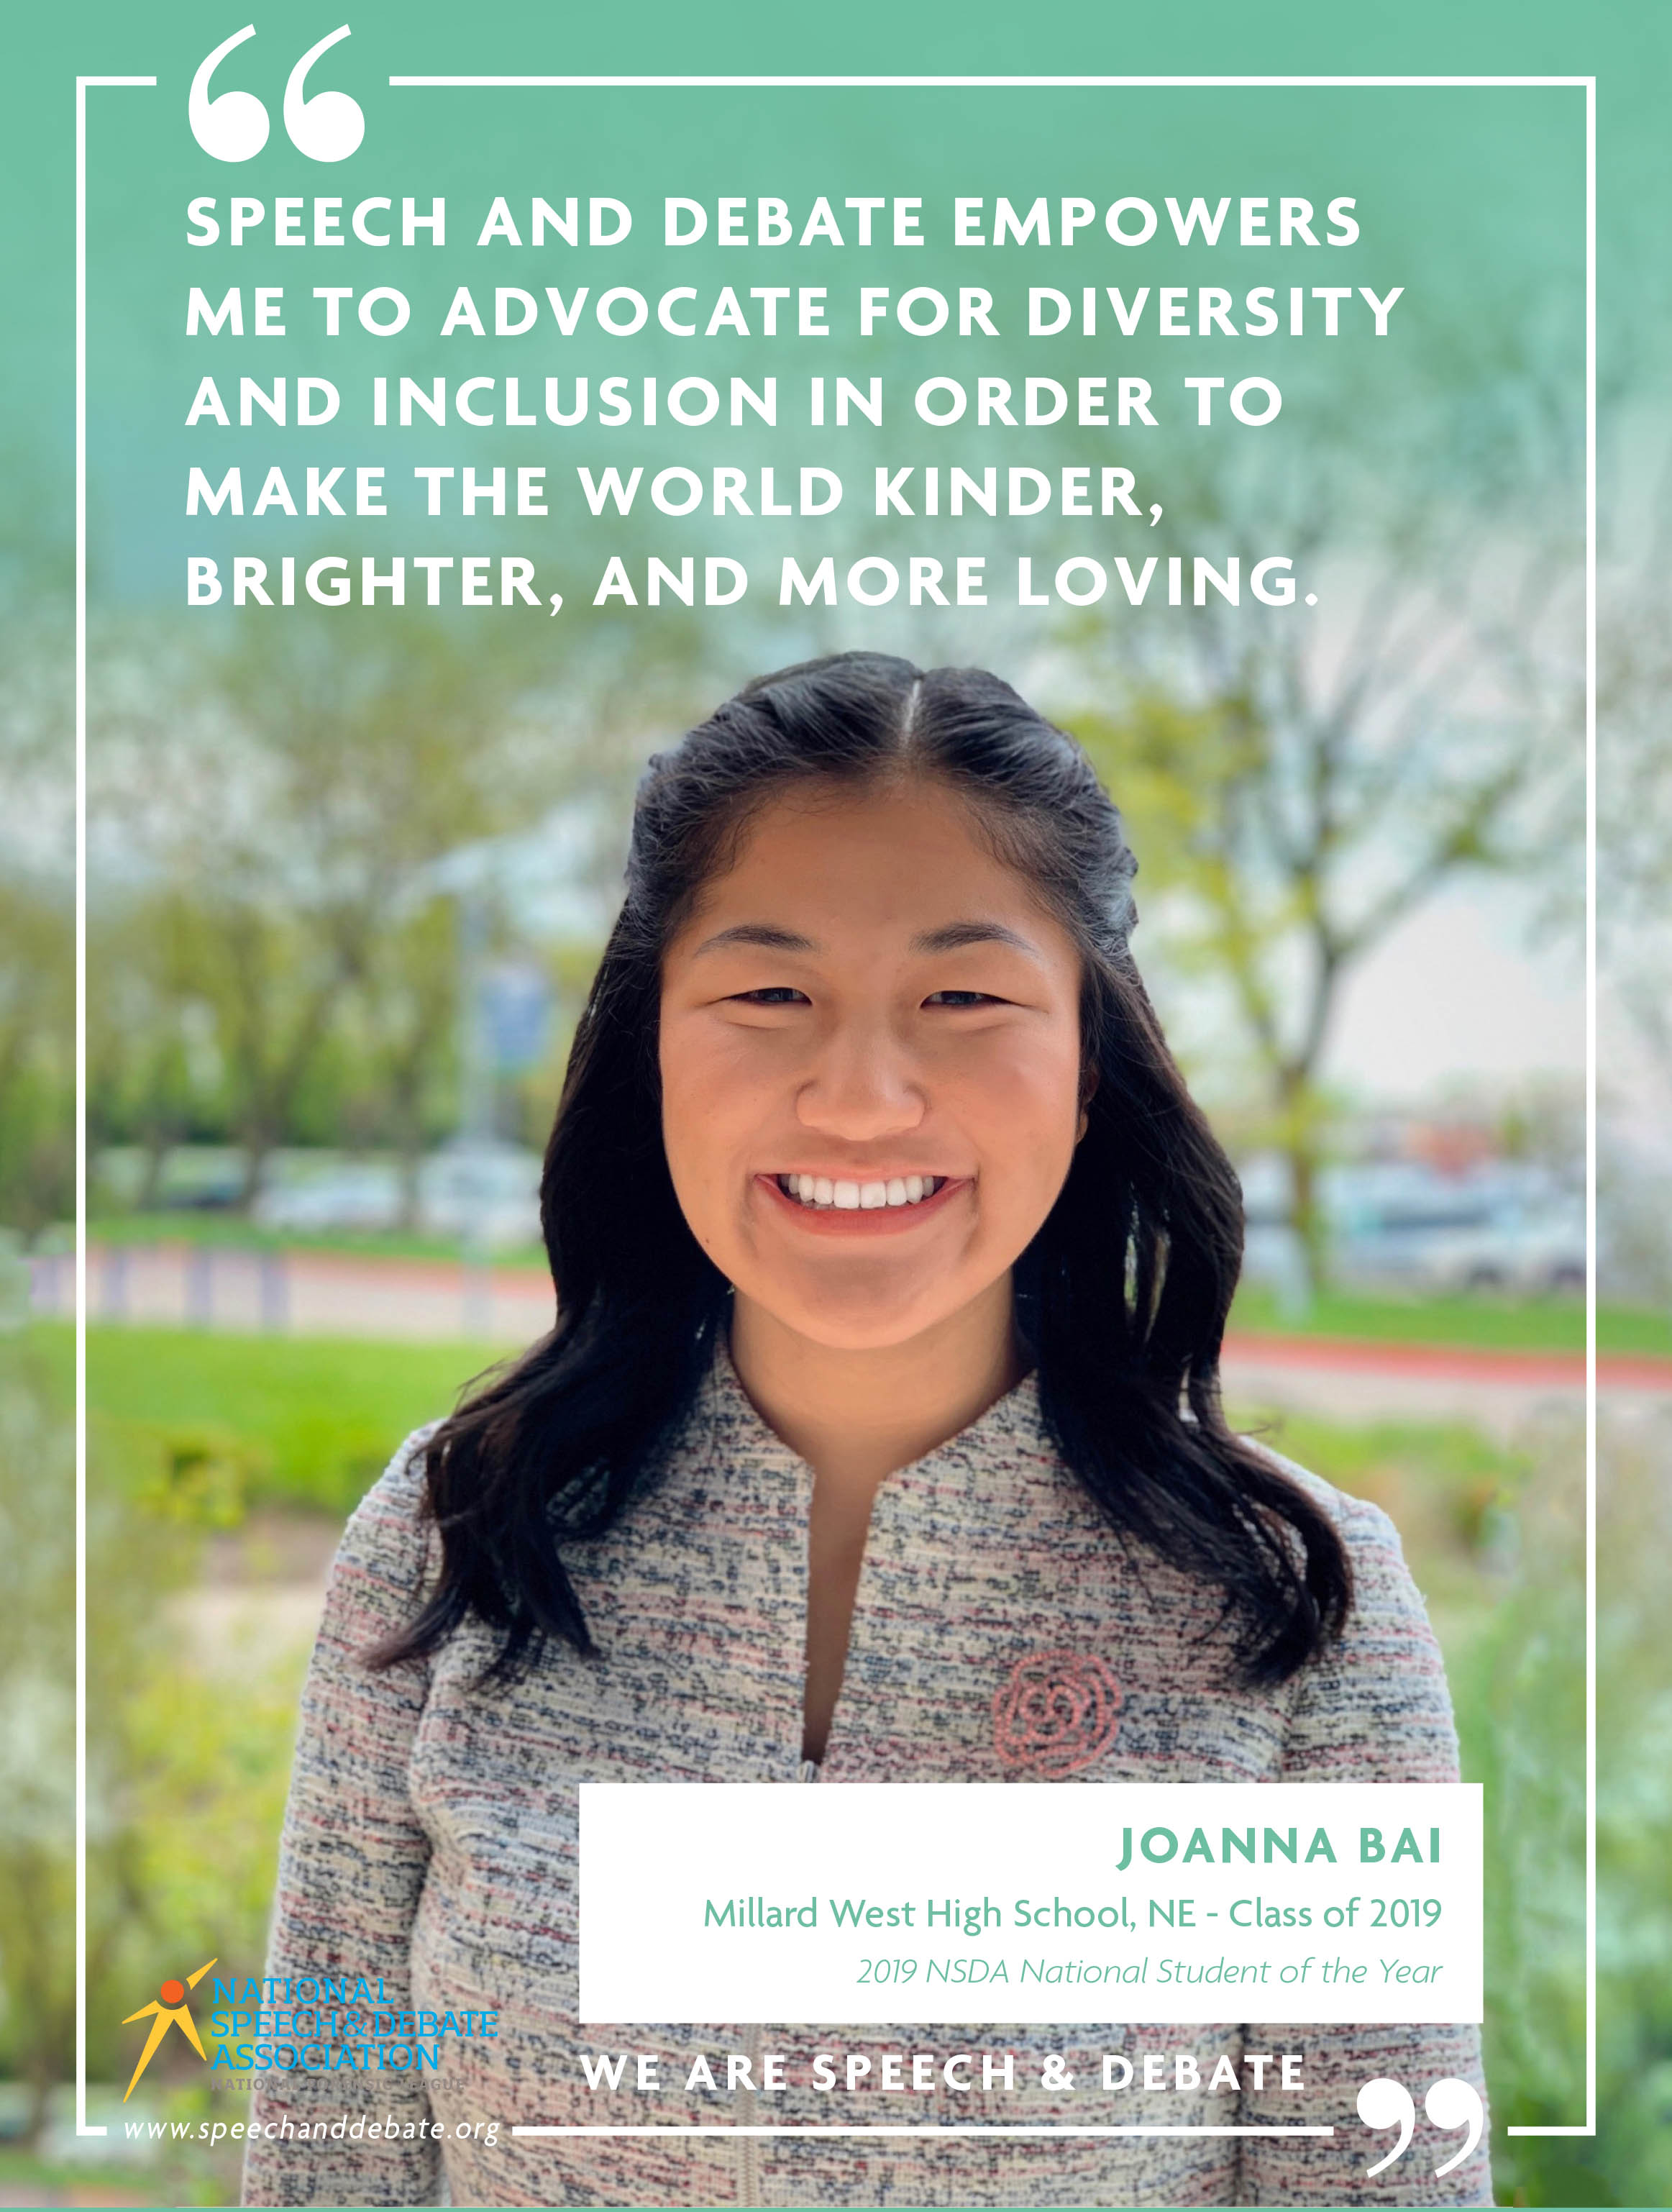 "SPEECH AND DEBATE EMPOWERS ME TO ADVOCATE FOR DIVERSITY AND INCLUSION IN ORDER TO MAKE THE WORLD KINDER, BRIGHTER, AND MORE LOVING." - Joanna Bai